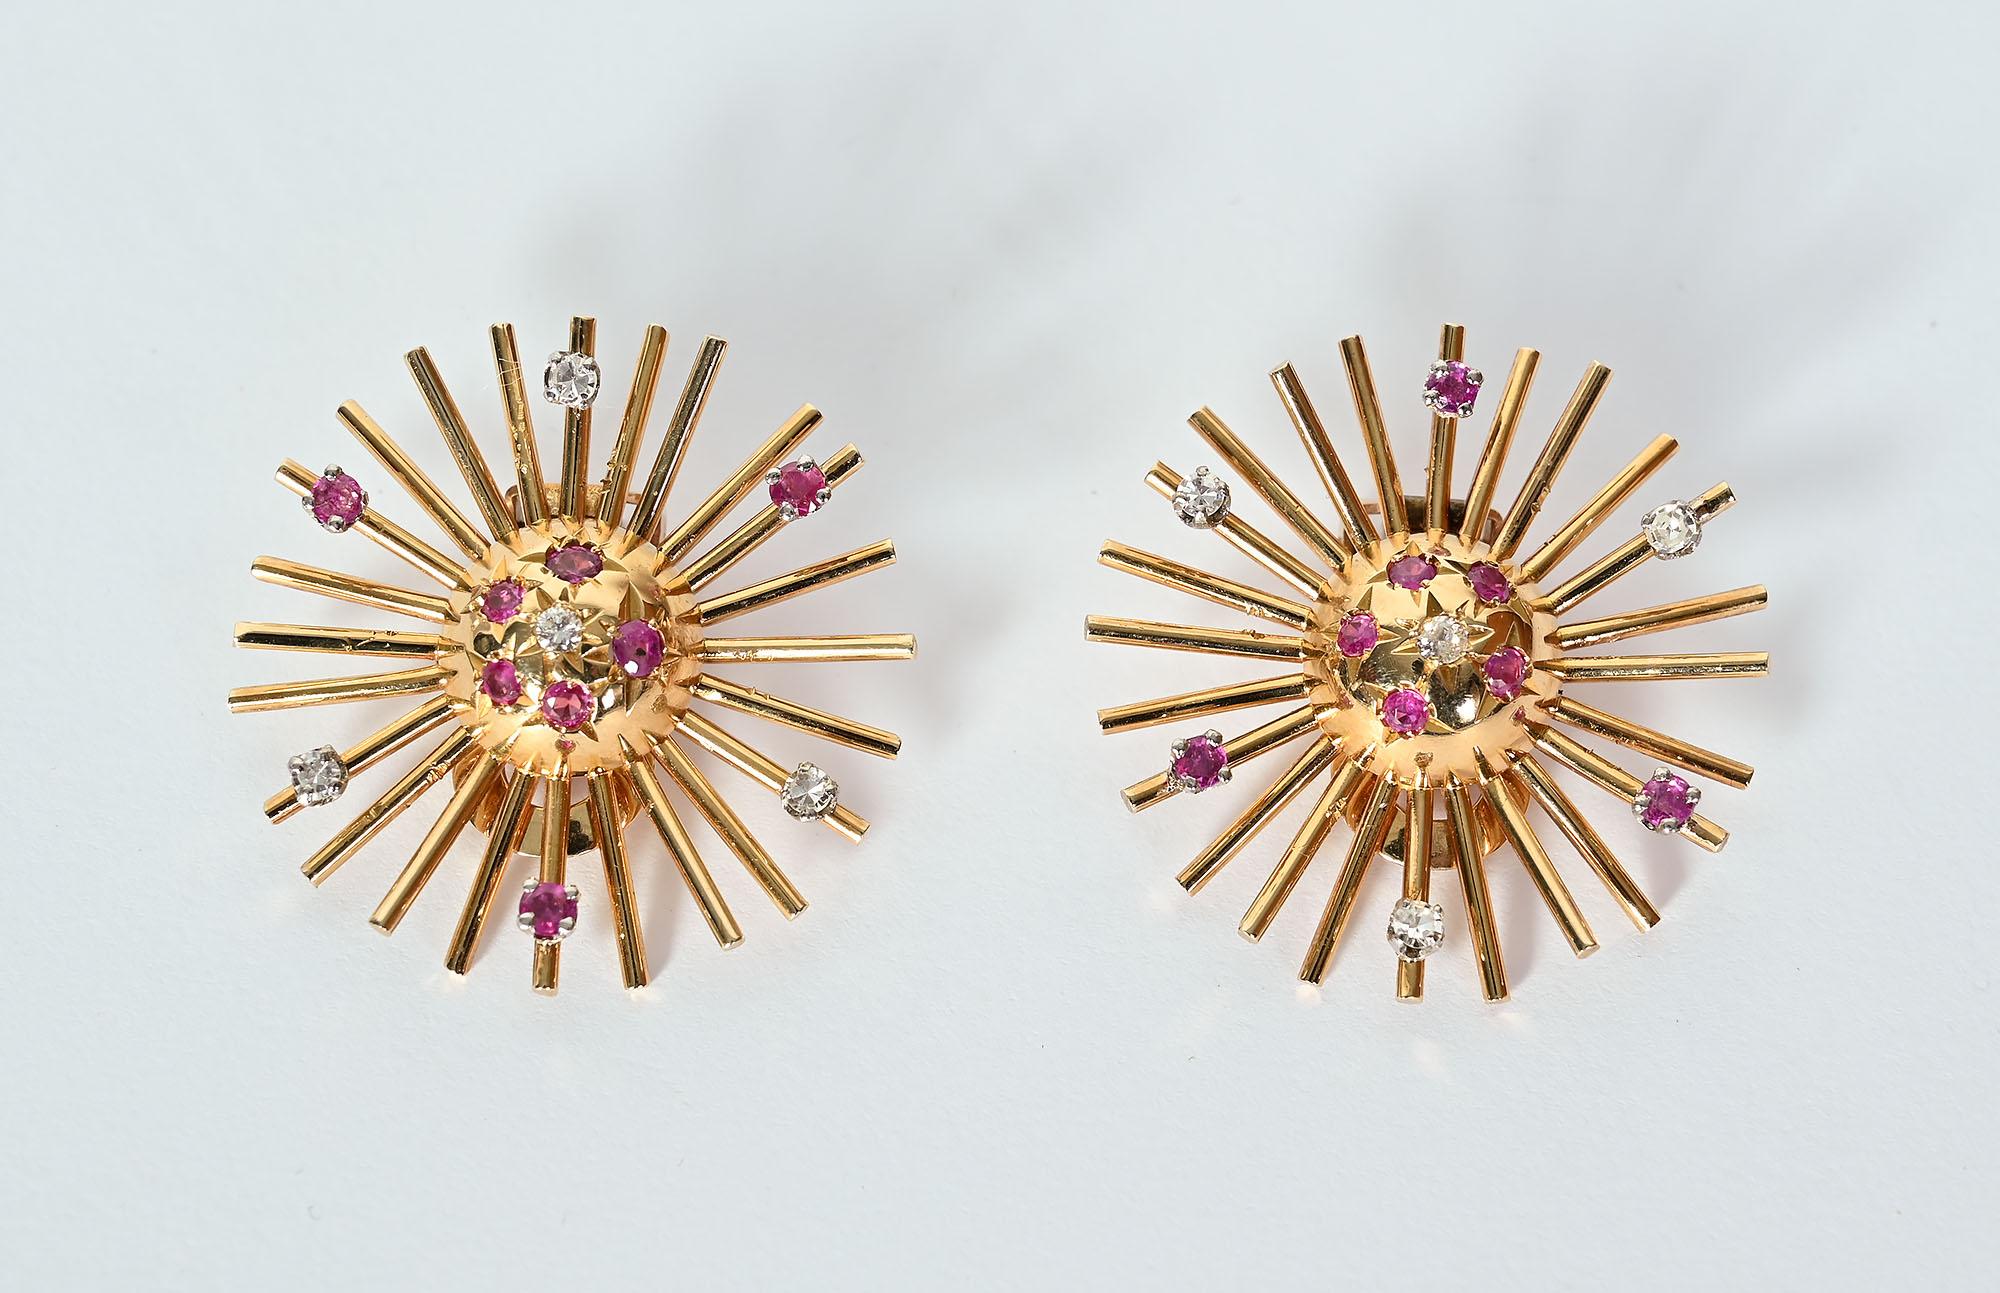 Retro Sunburst earrings in 14 karat rose gold. Domed centers add dimensionality to the earrings. They have eight round brilliant cut diamonds with a total weight of .32 carats and sixteen rubies weighing 10.45 dwt.
A matching brooch is available as